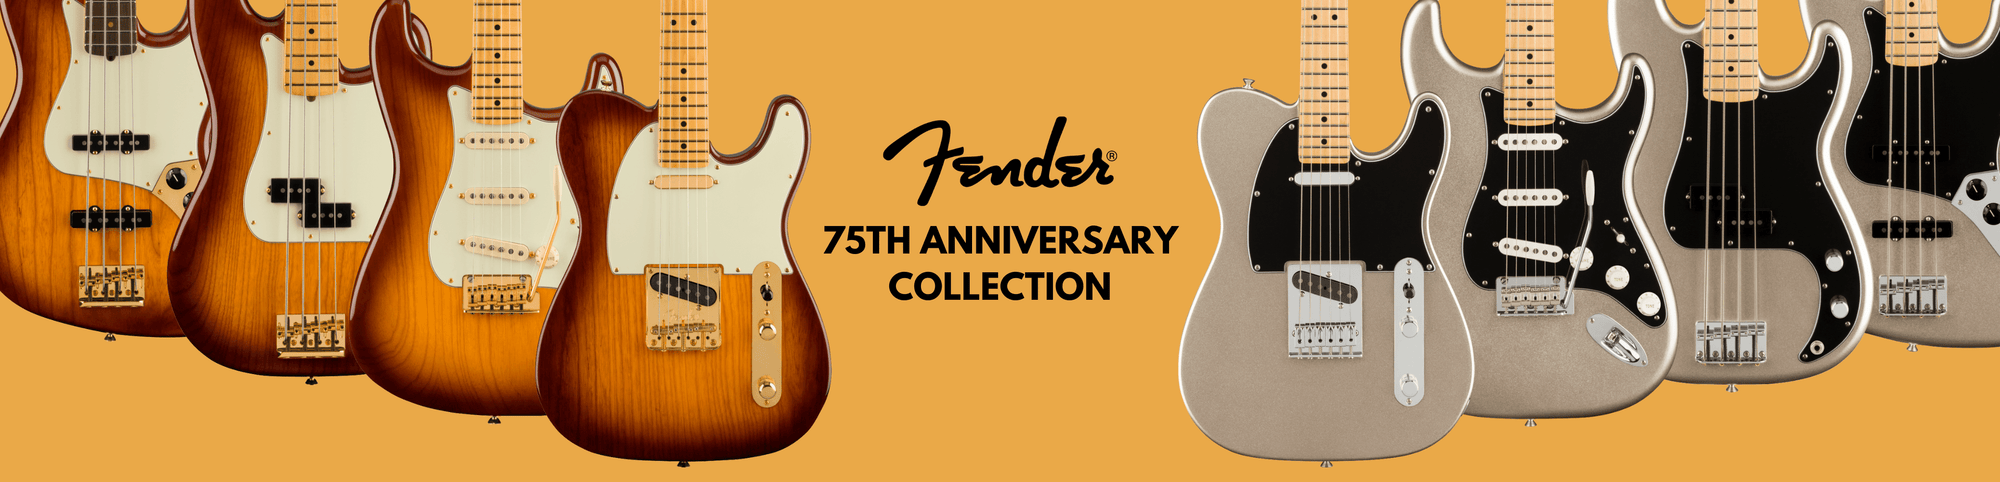 Fender unveil the 75th Anniversary Collection-Sky Music